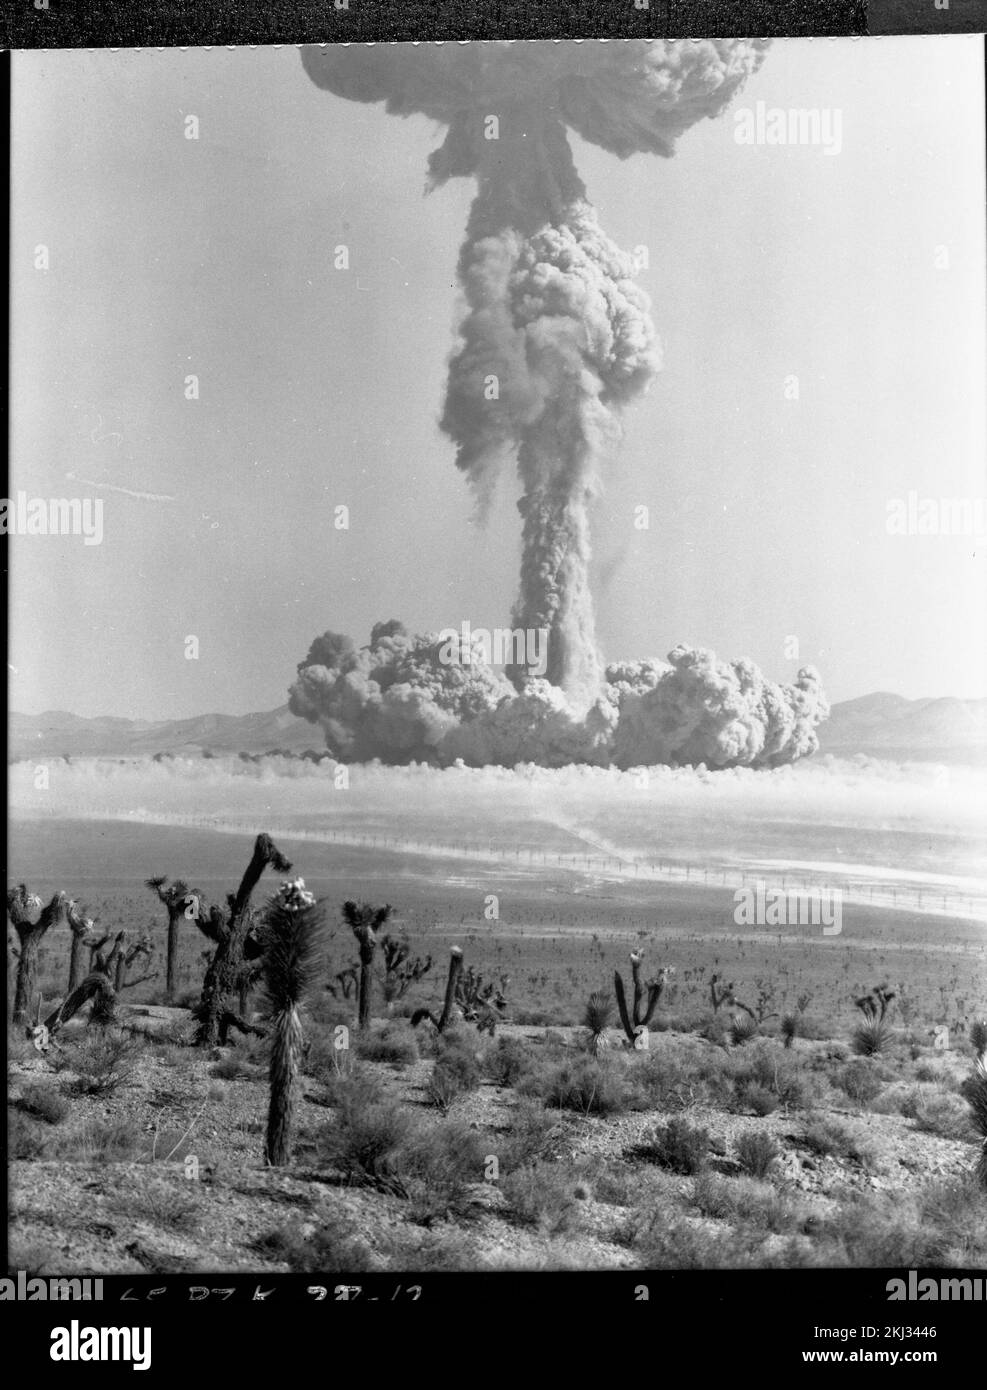 Project 30-65 - Operation Plumbob (Nevada Test Site) Detonation. FIZEAU fireball: Series of 3, ground views (3 of 3). Photographs of Atmospheric Nuclear Testing at Pacific Island and Nevada Test Sites. Stock Photo